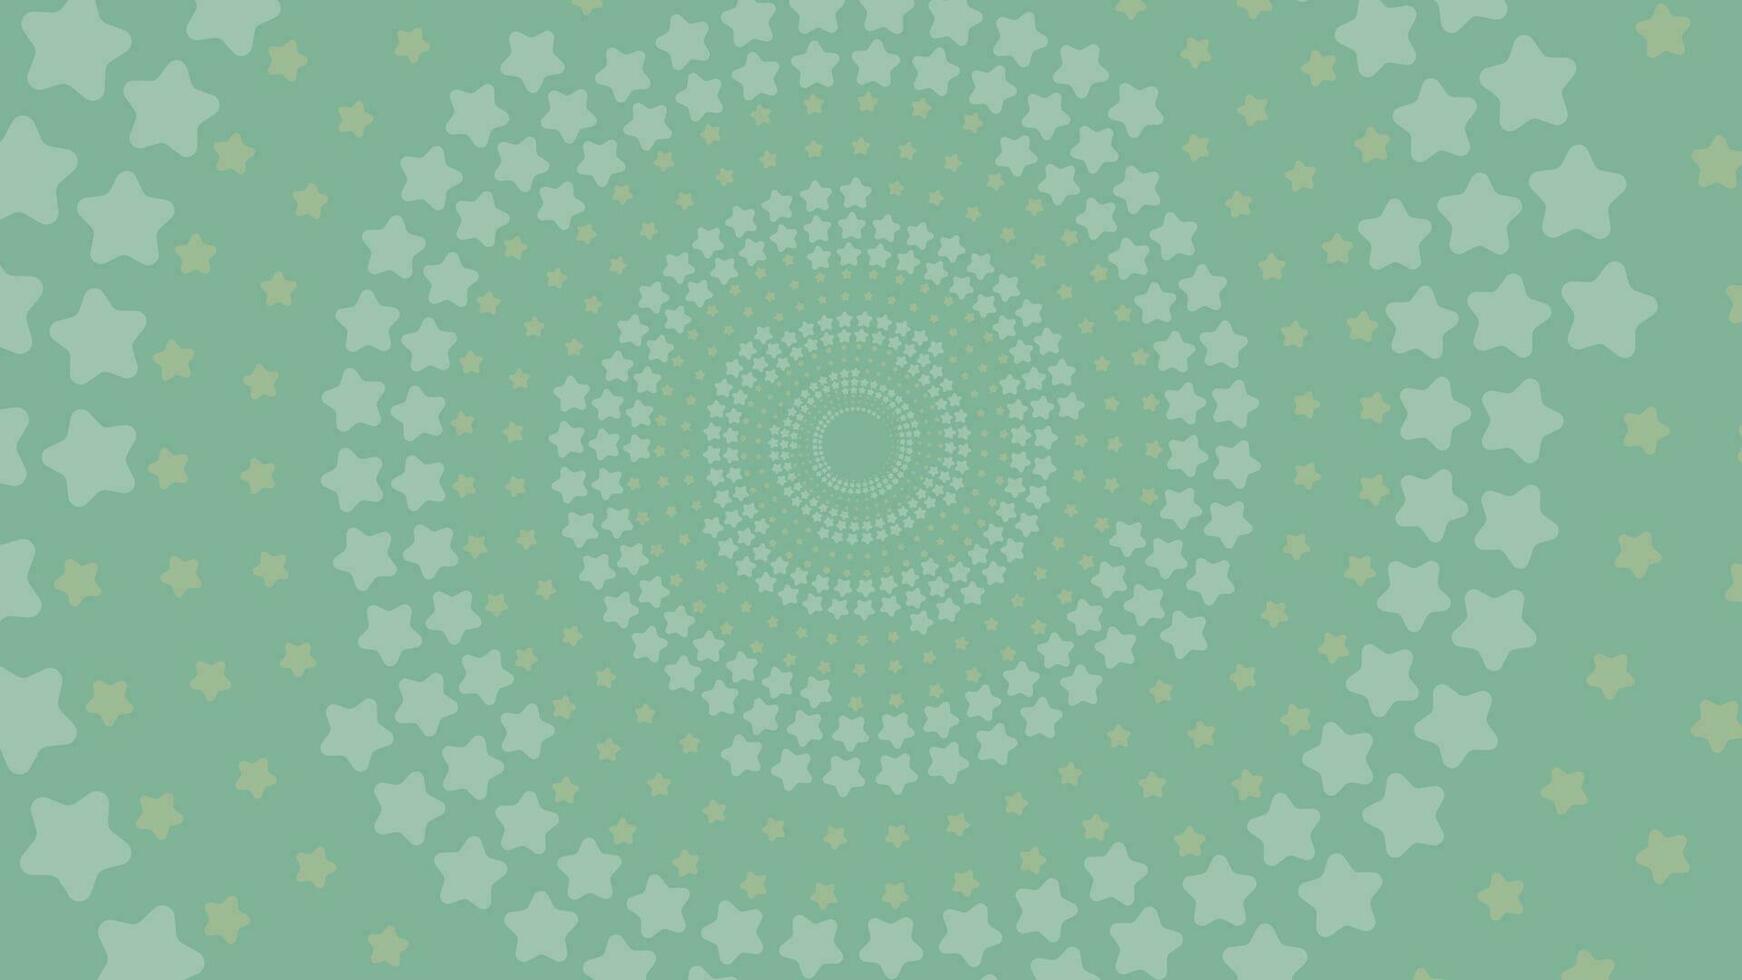 Abstract spiral star ball background for festival use like Christmas and new year. This creative minimalist design can be used as a banner or background wallpaper. vector